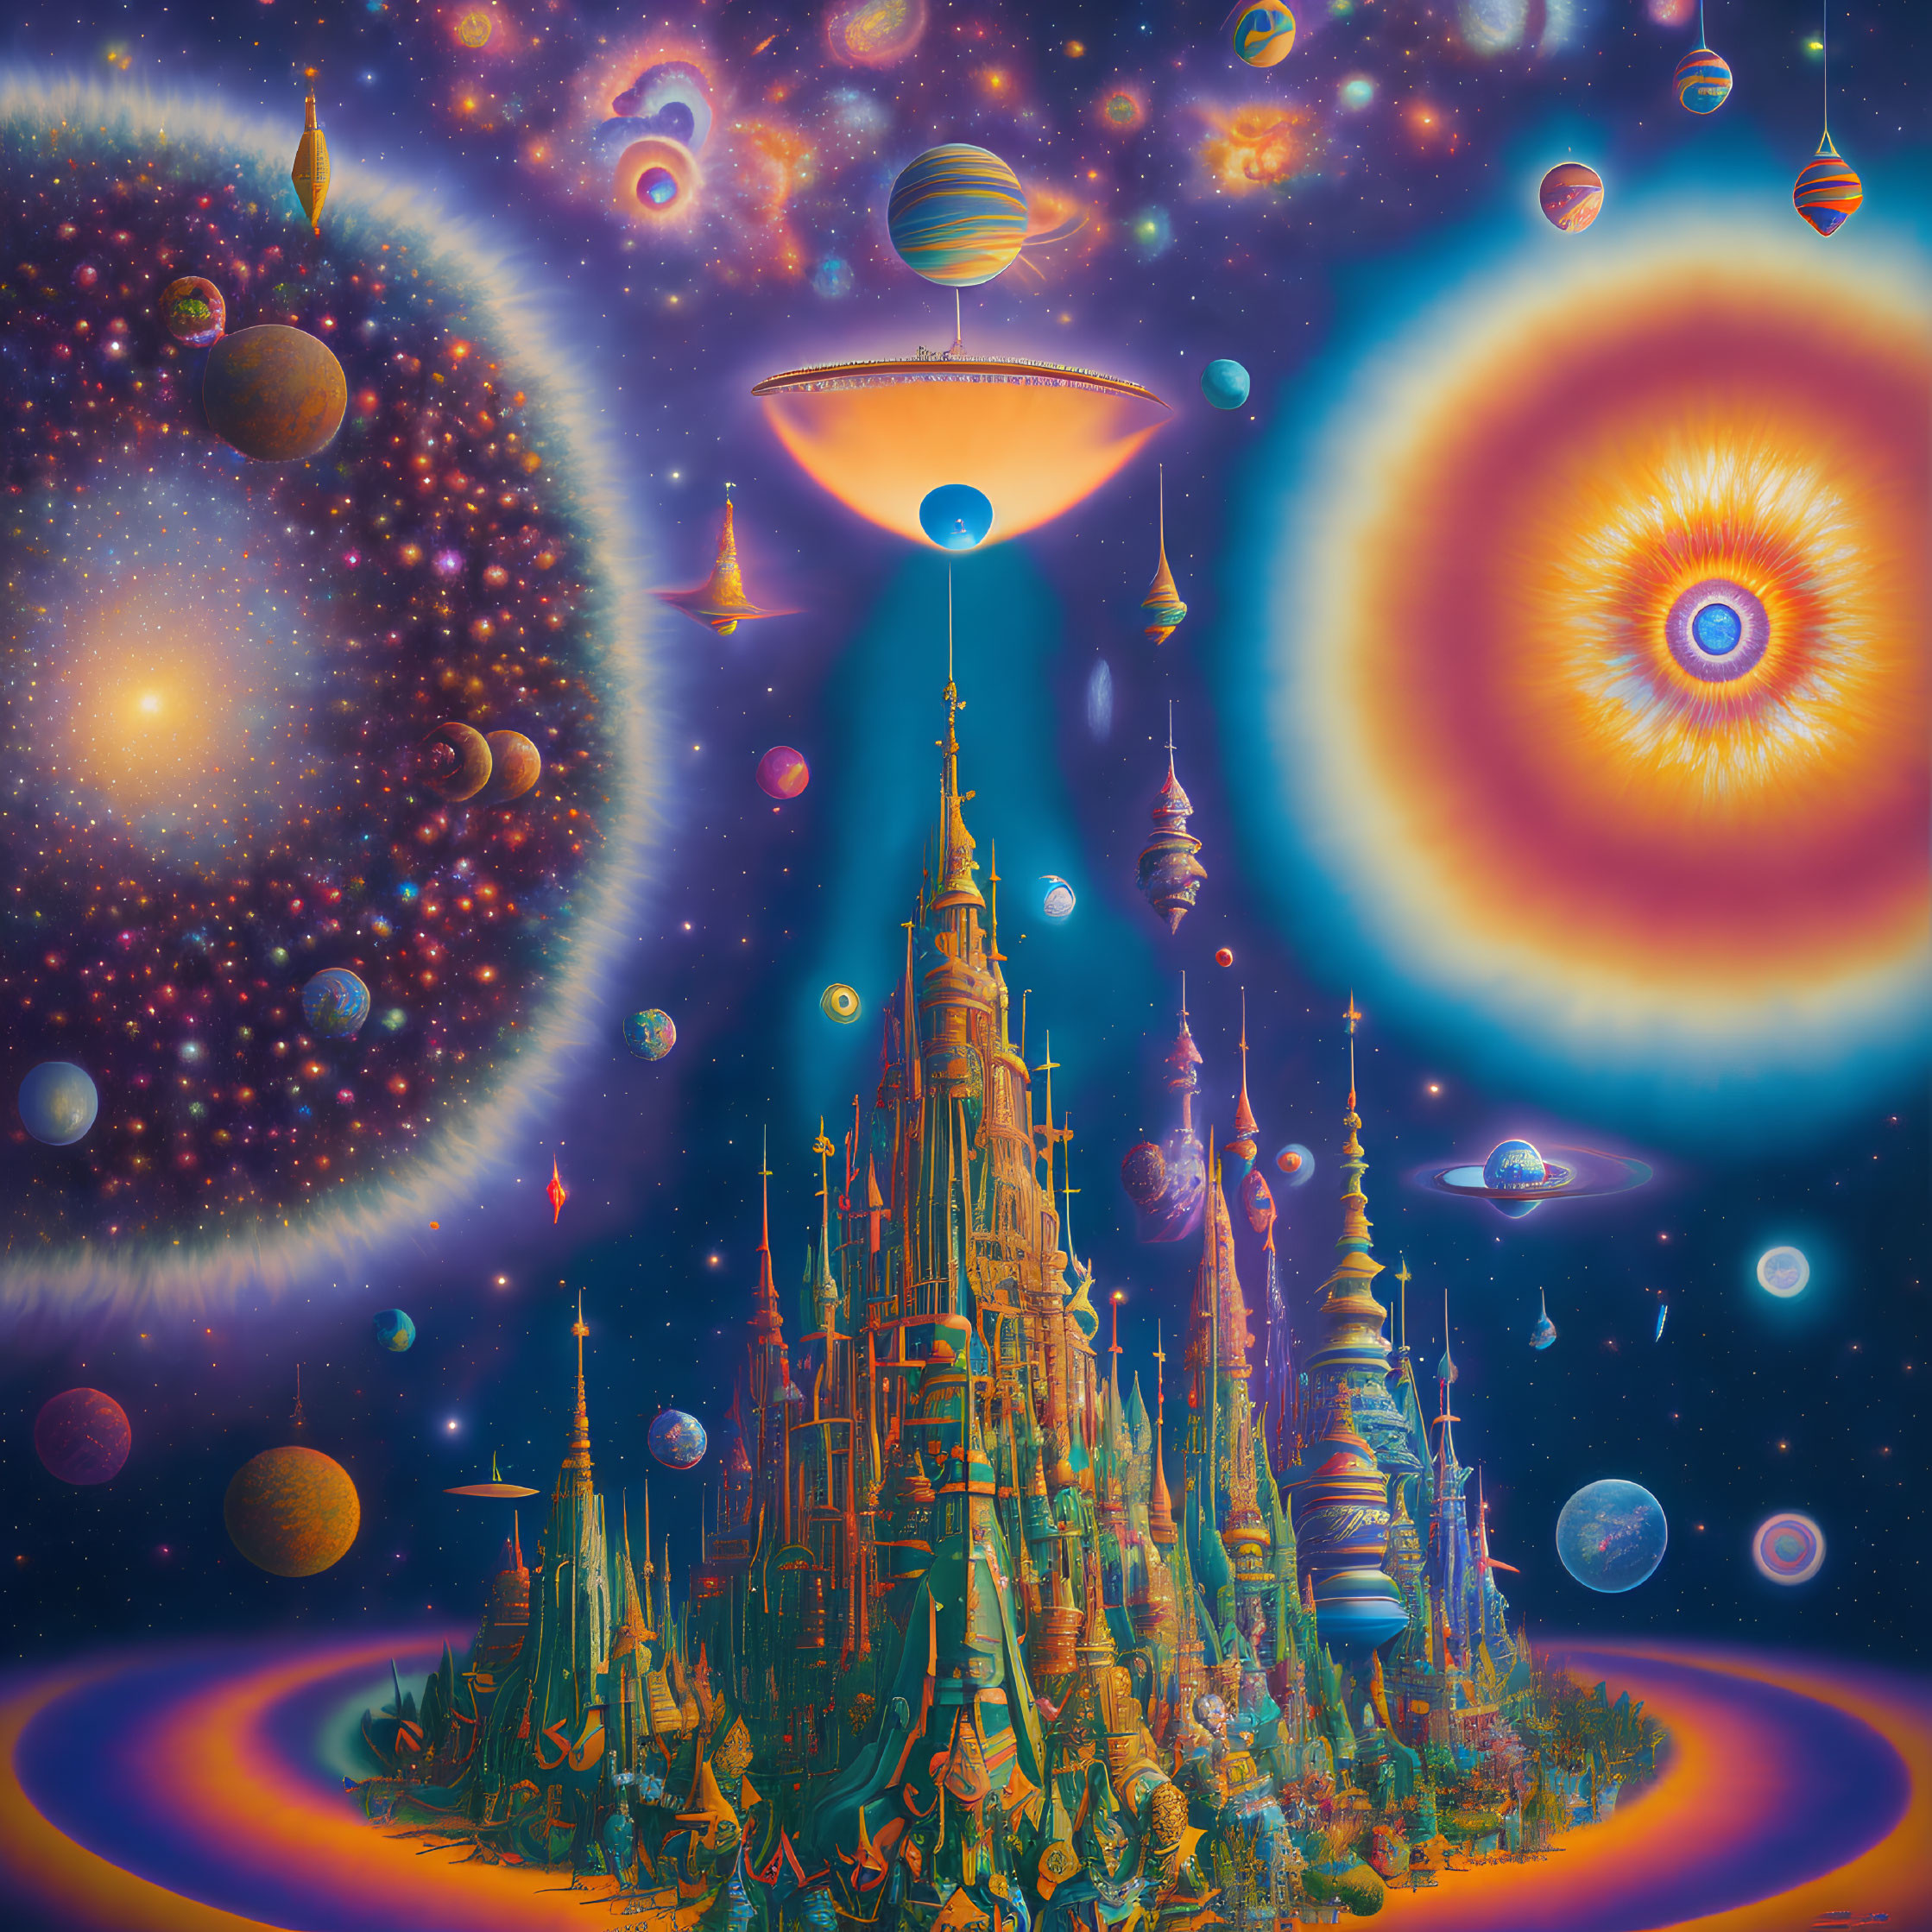 Colorful Psychedelic Sci-Fi Landscape with Celestial Bodies